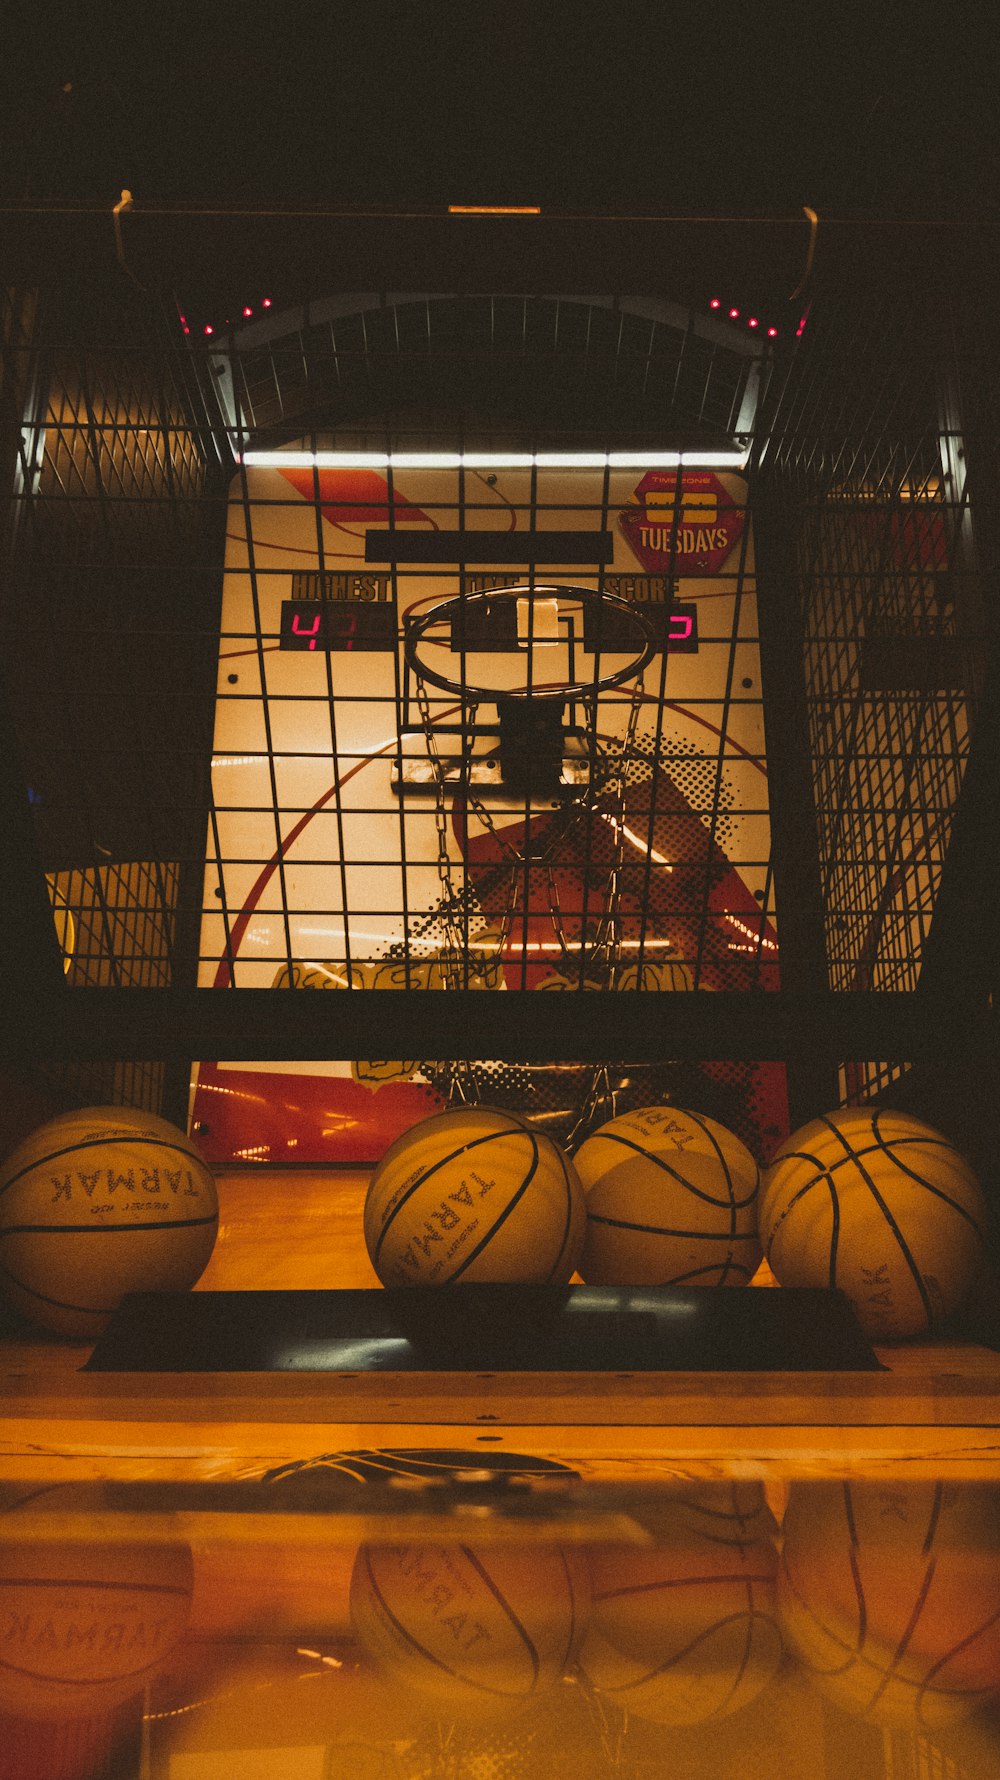 a group of basketballs sitting on top of a table